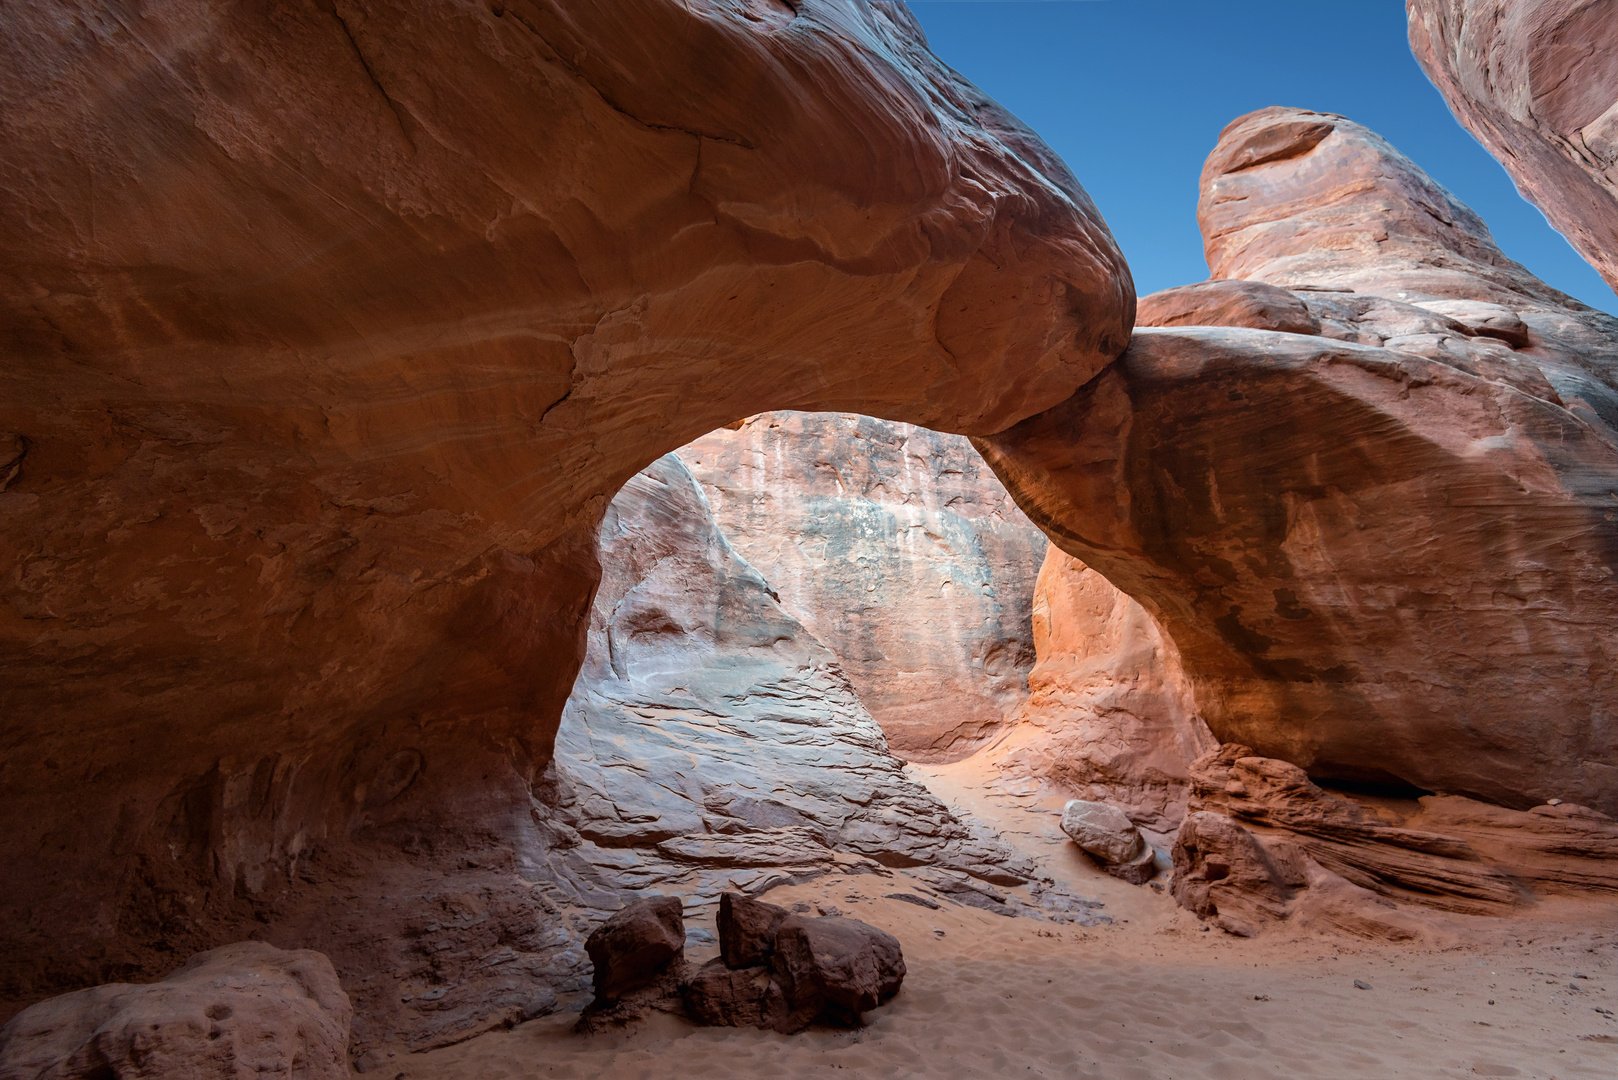 Arches Canyon - Sand Dune Arch